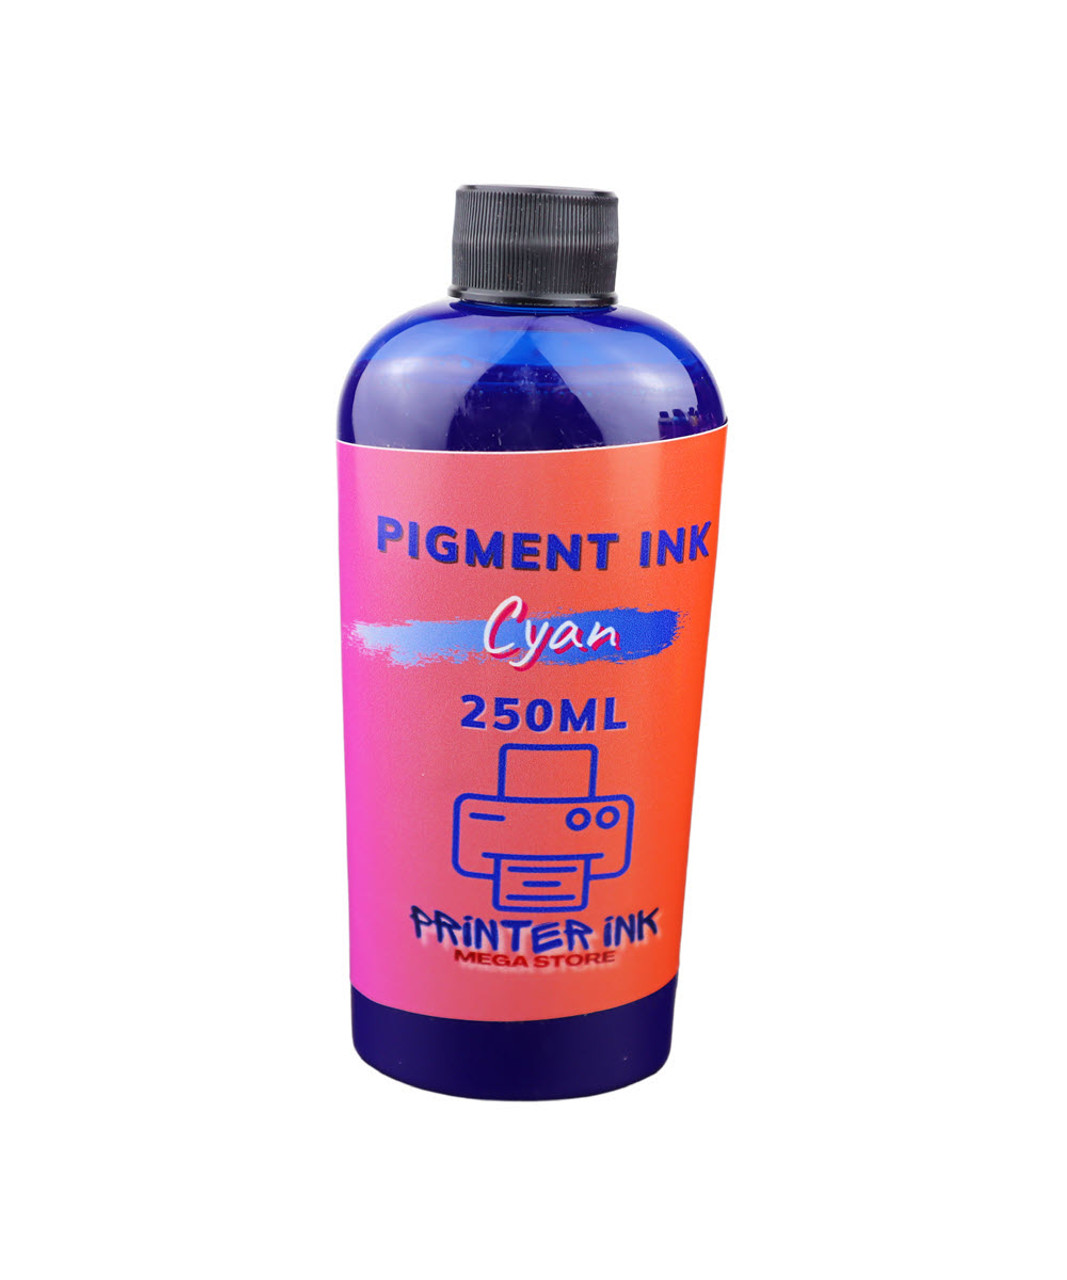 Cyan Pigment Ink 250ml Bottle for Epson Expression XP-4100 XP-4105 Printer